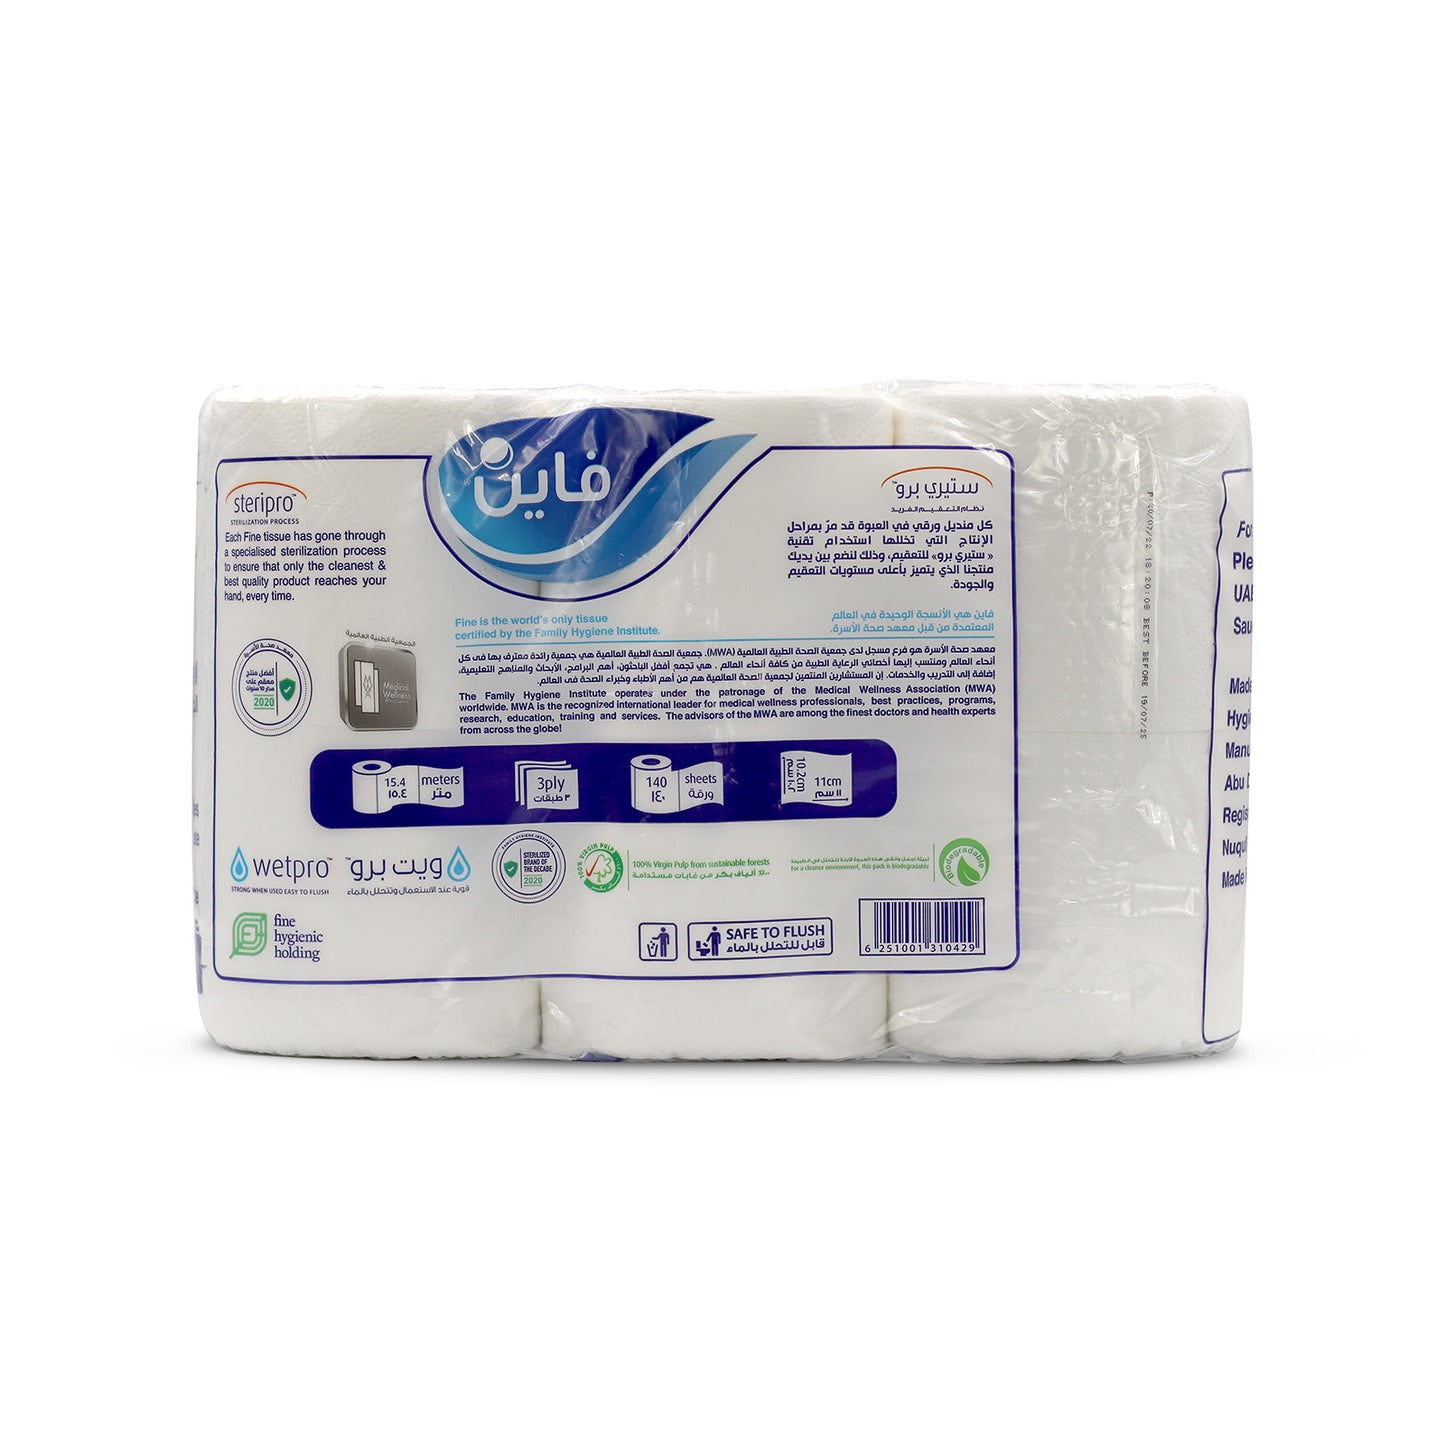 Fine Deluxe Toilet Paper 140 Sheets 3 Ply (12 rolls)